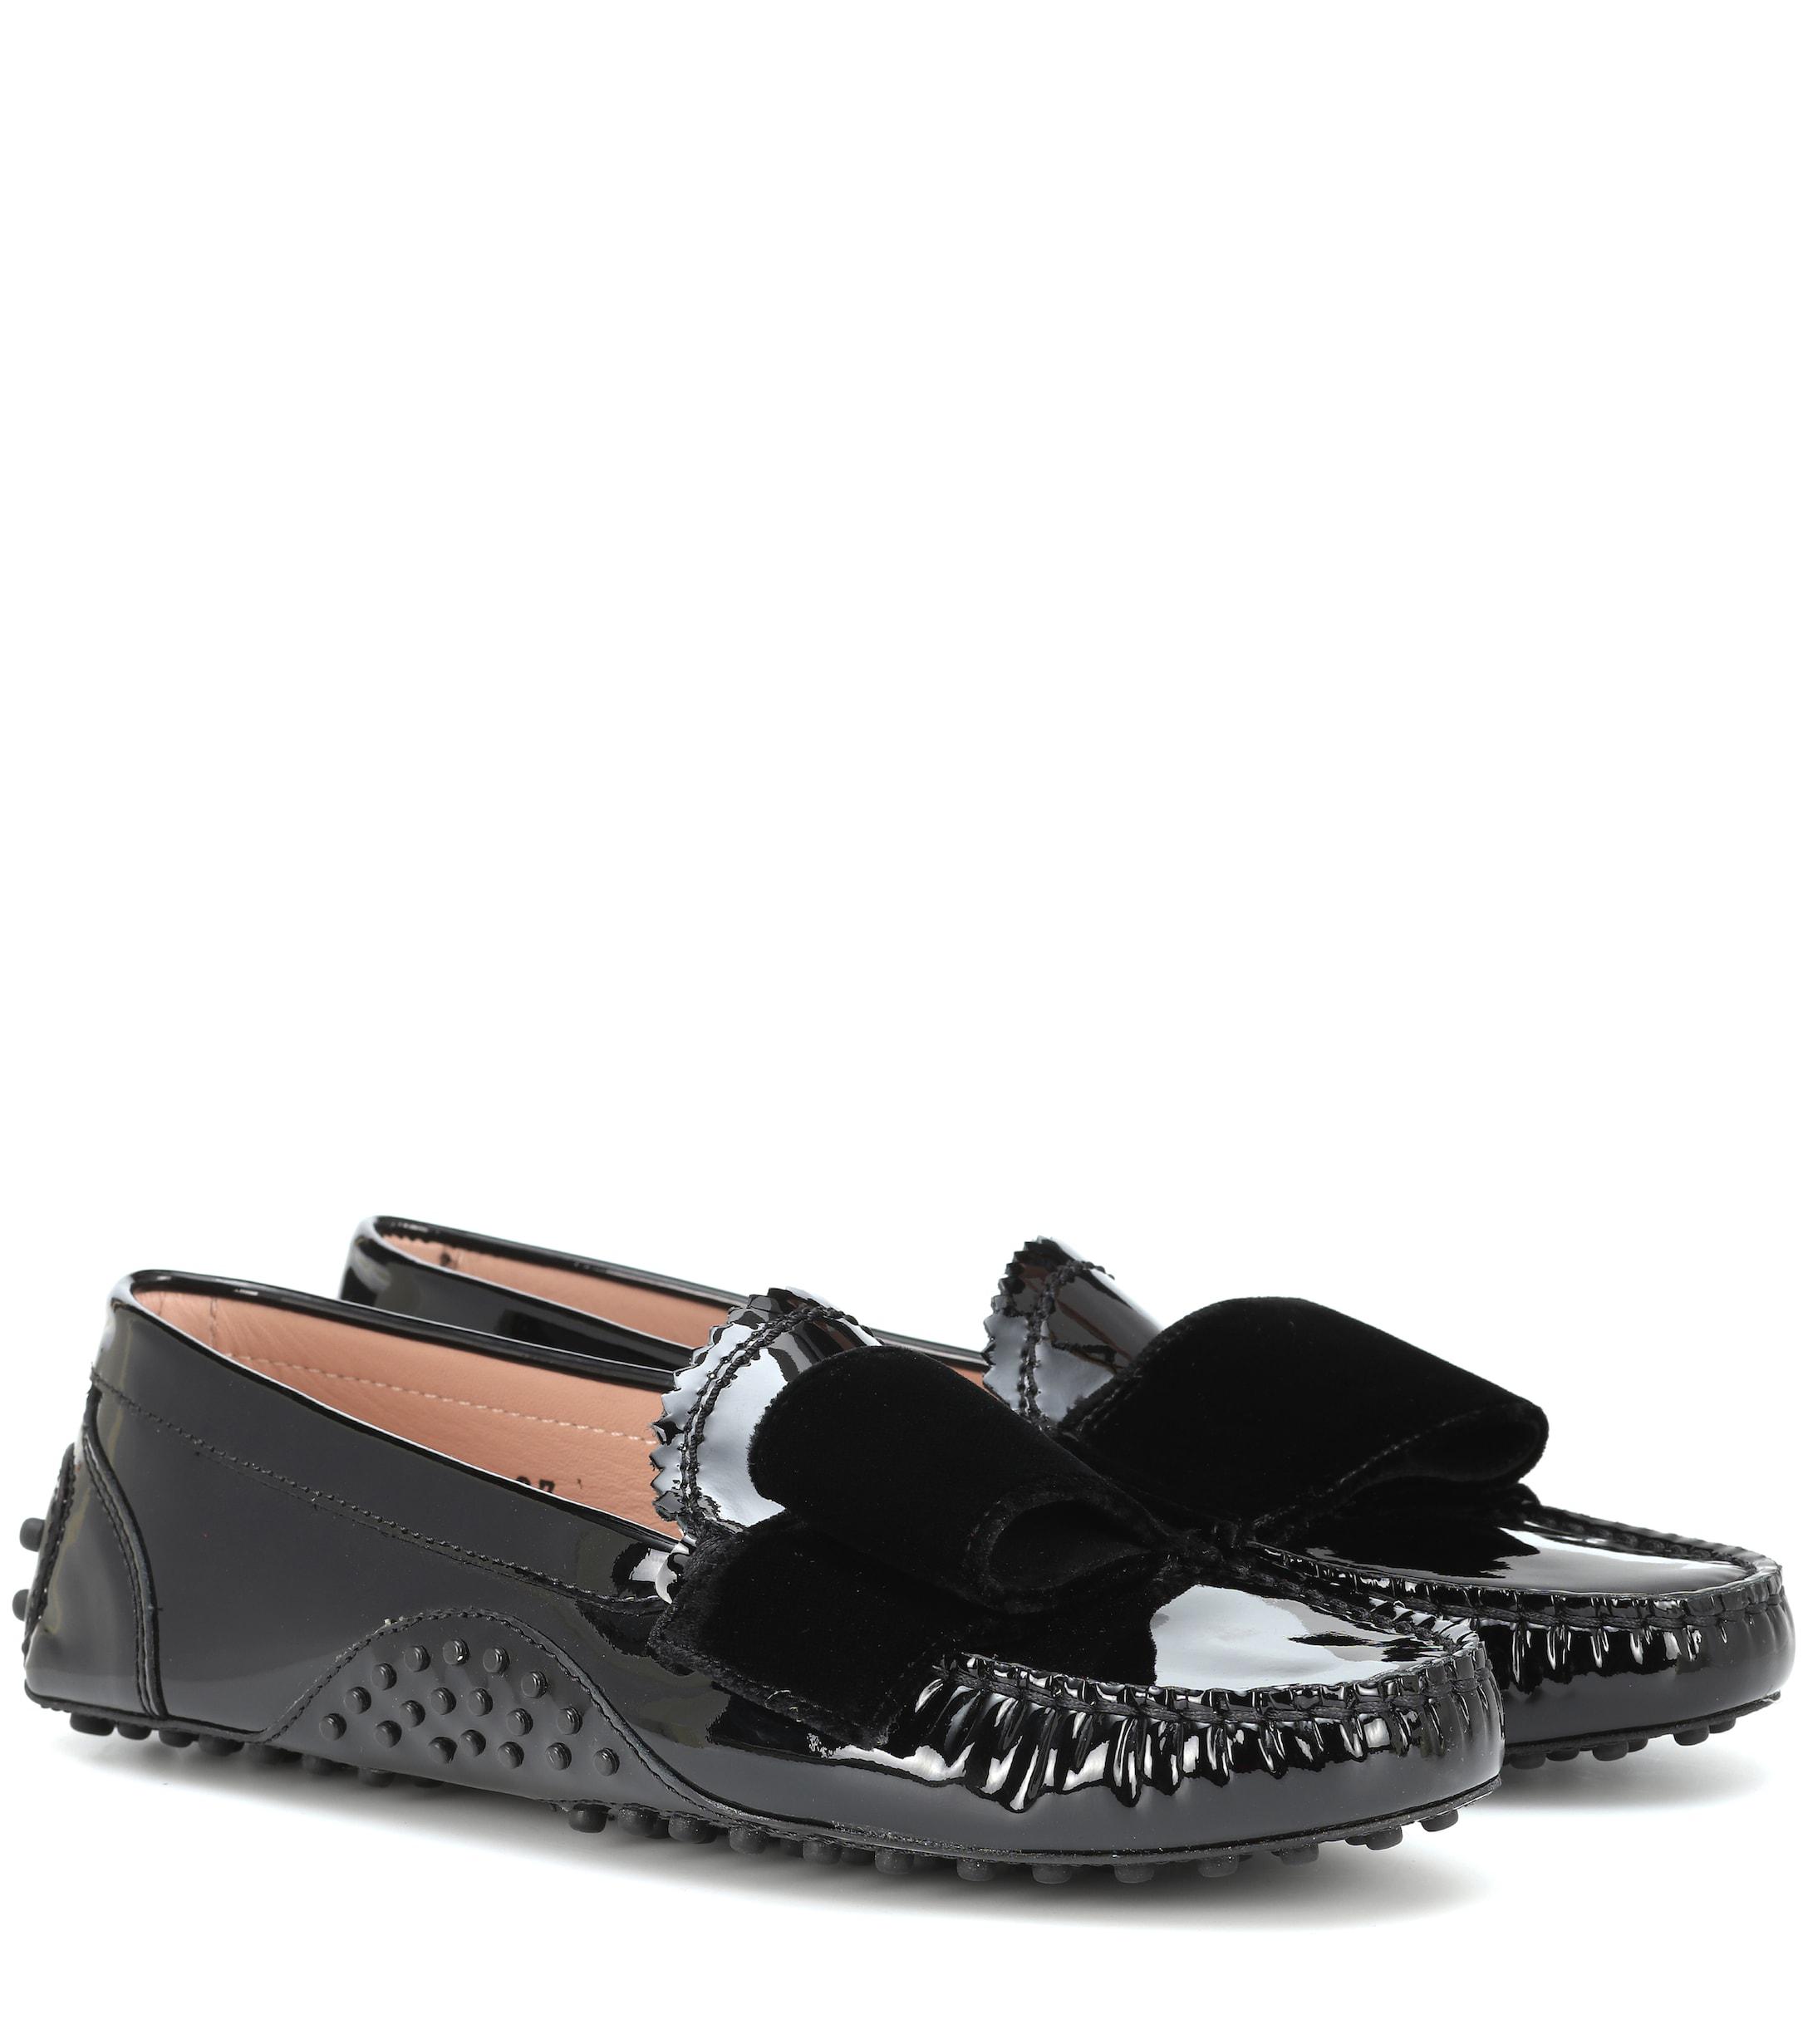 Tod's X Alessandro Dell'acqua Patent Leather Loafers in Black | Lyst